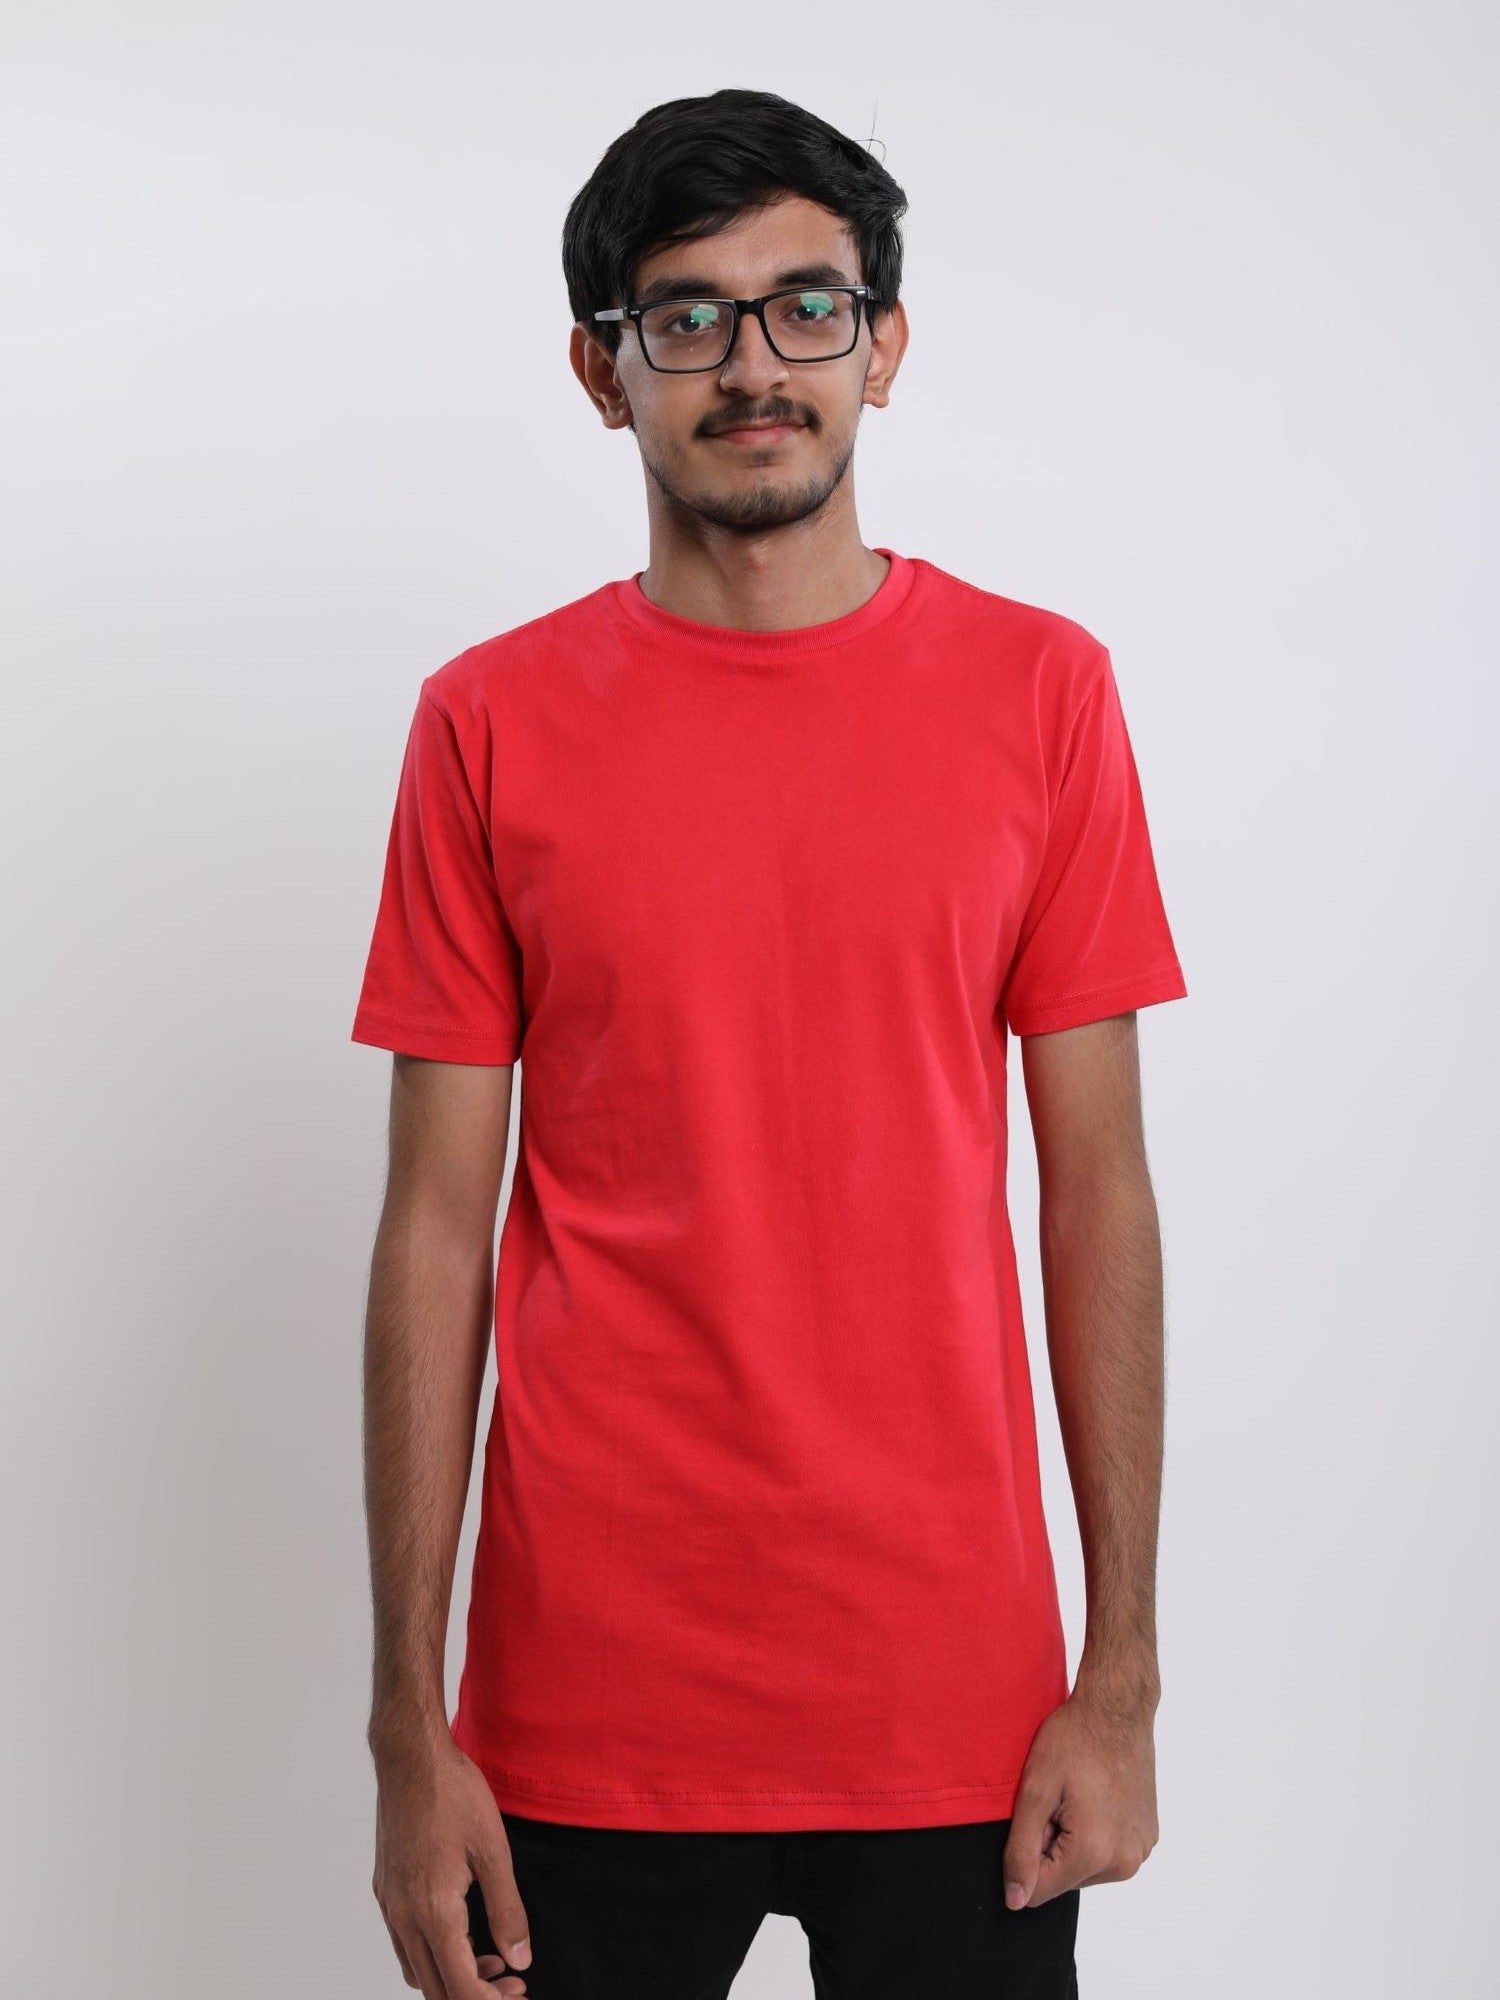 A tall and skinny man in the studio standing in front of a light background. The model is wearing an extra long slim red t-shirt. The red t-shirt features a 3" longer body, 100% organic cotton, and is soft & preshrunk. The red t-shirt is ideal for tall slim men 6'2"+.